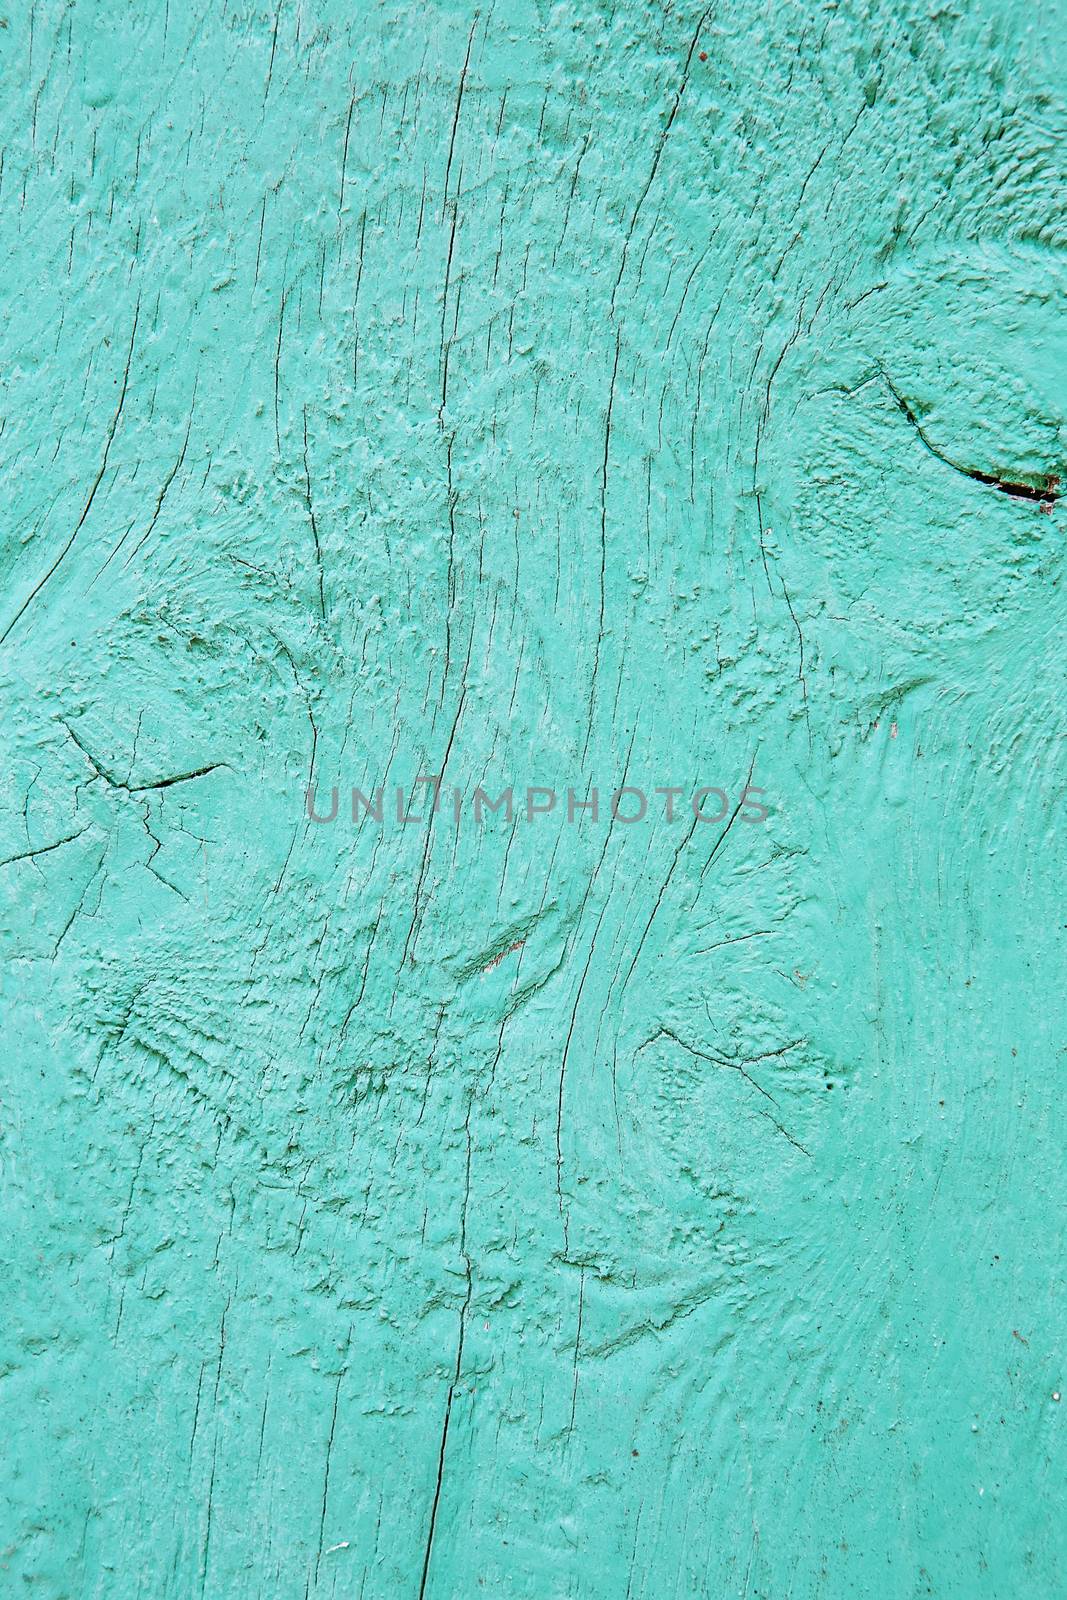 Cracking and peeling turquoise paint on a wall. Vintage wood background with peeling blue paint. Old board with Irradiated paint